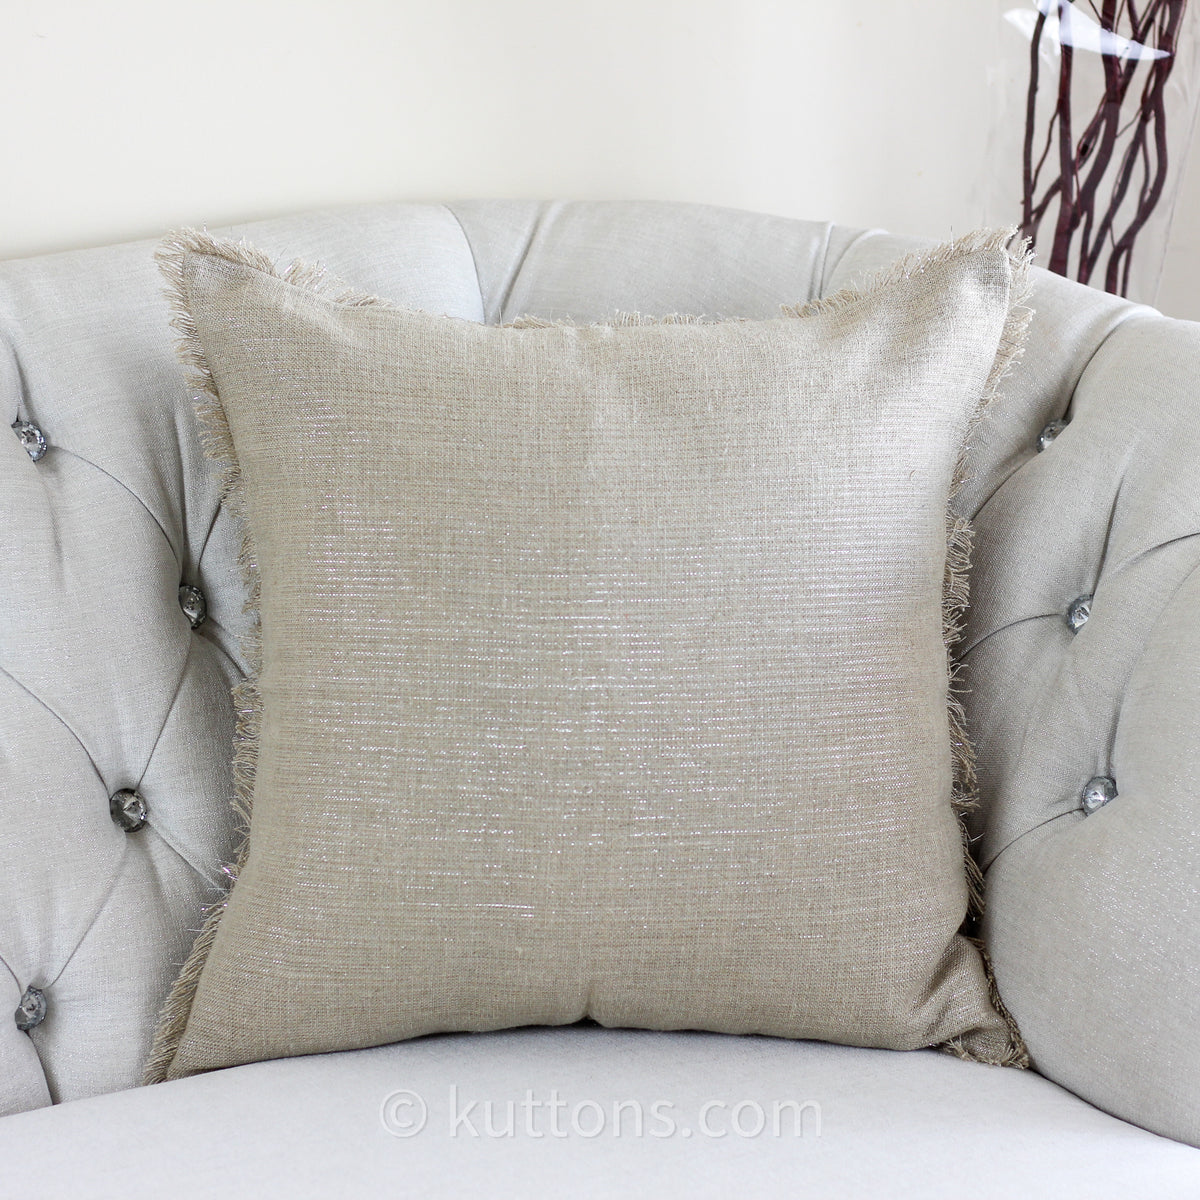 Handmade Linen Cushion Cover - With Shiny Lurex & Fringes | Cream, 20x20"